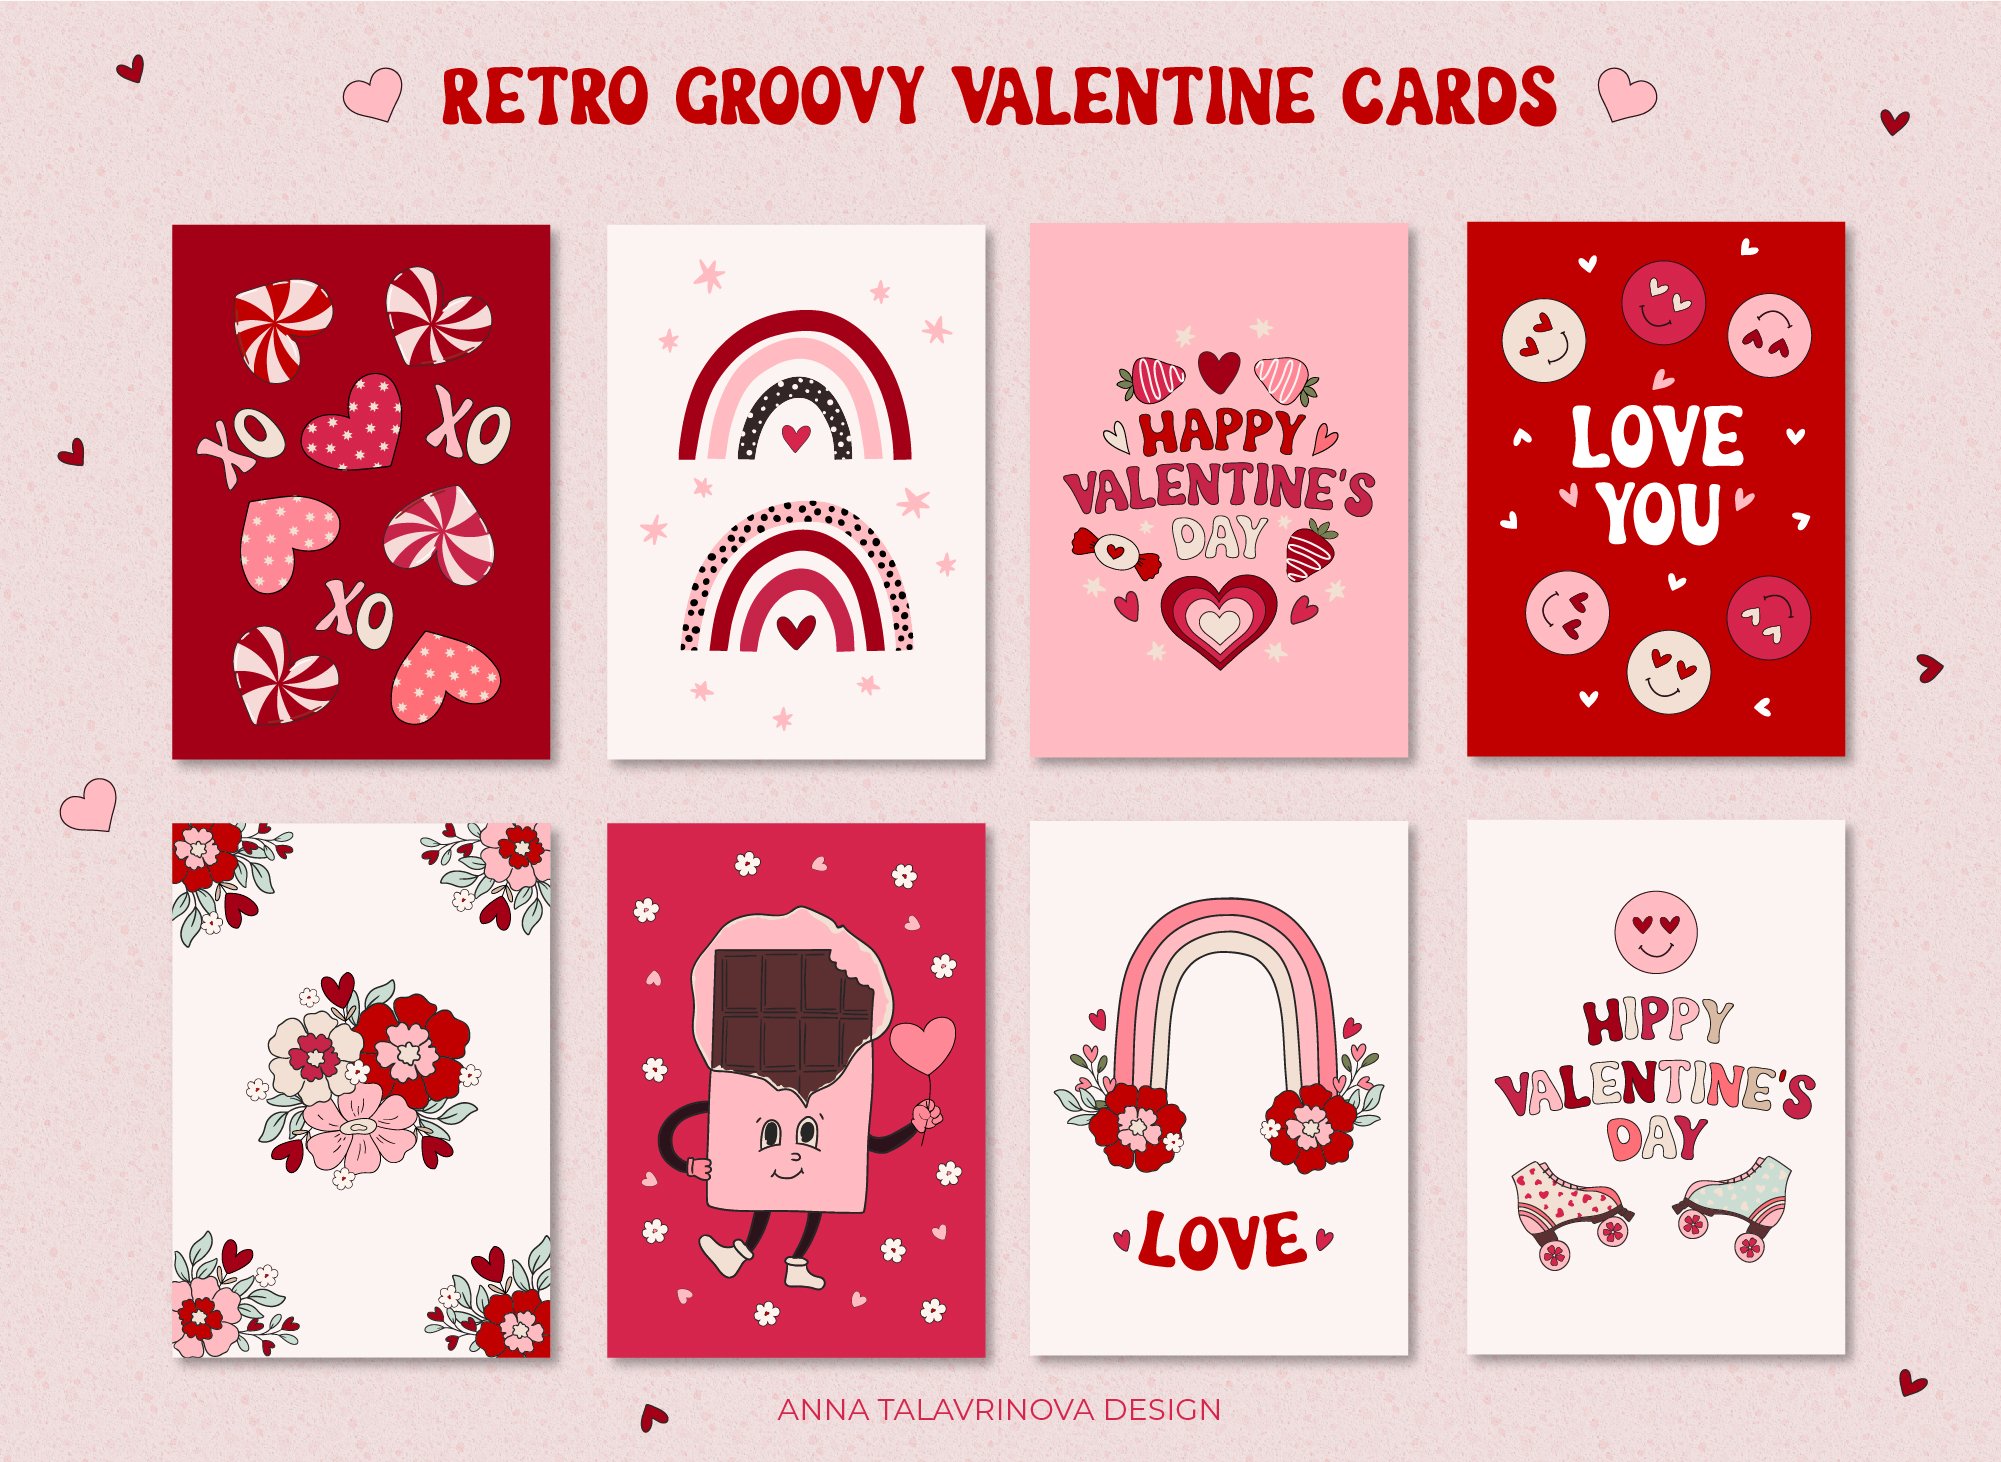 So cute cards for your Valentine.